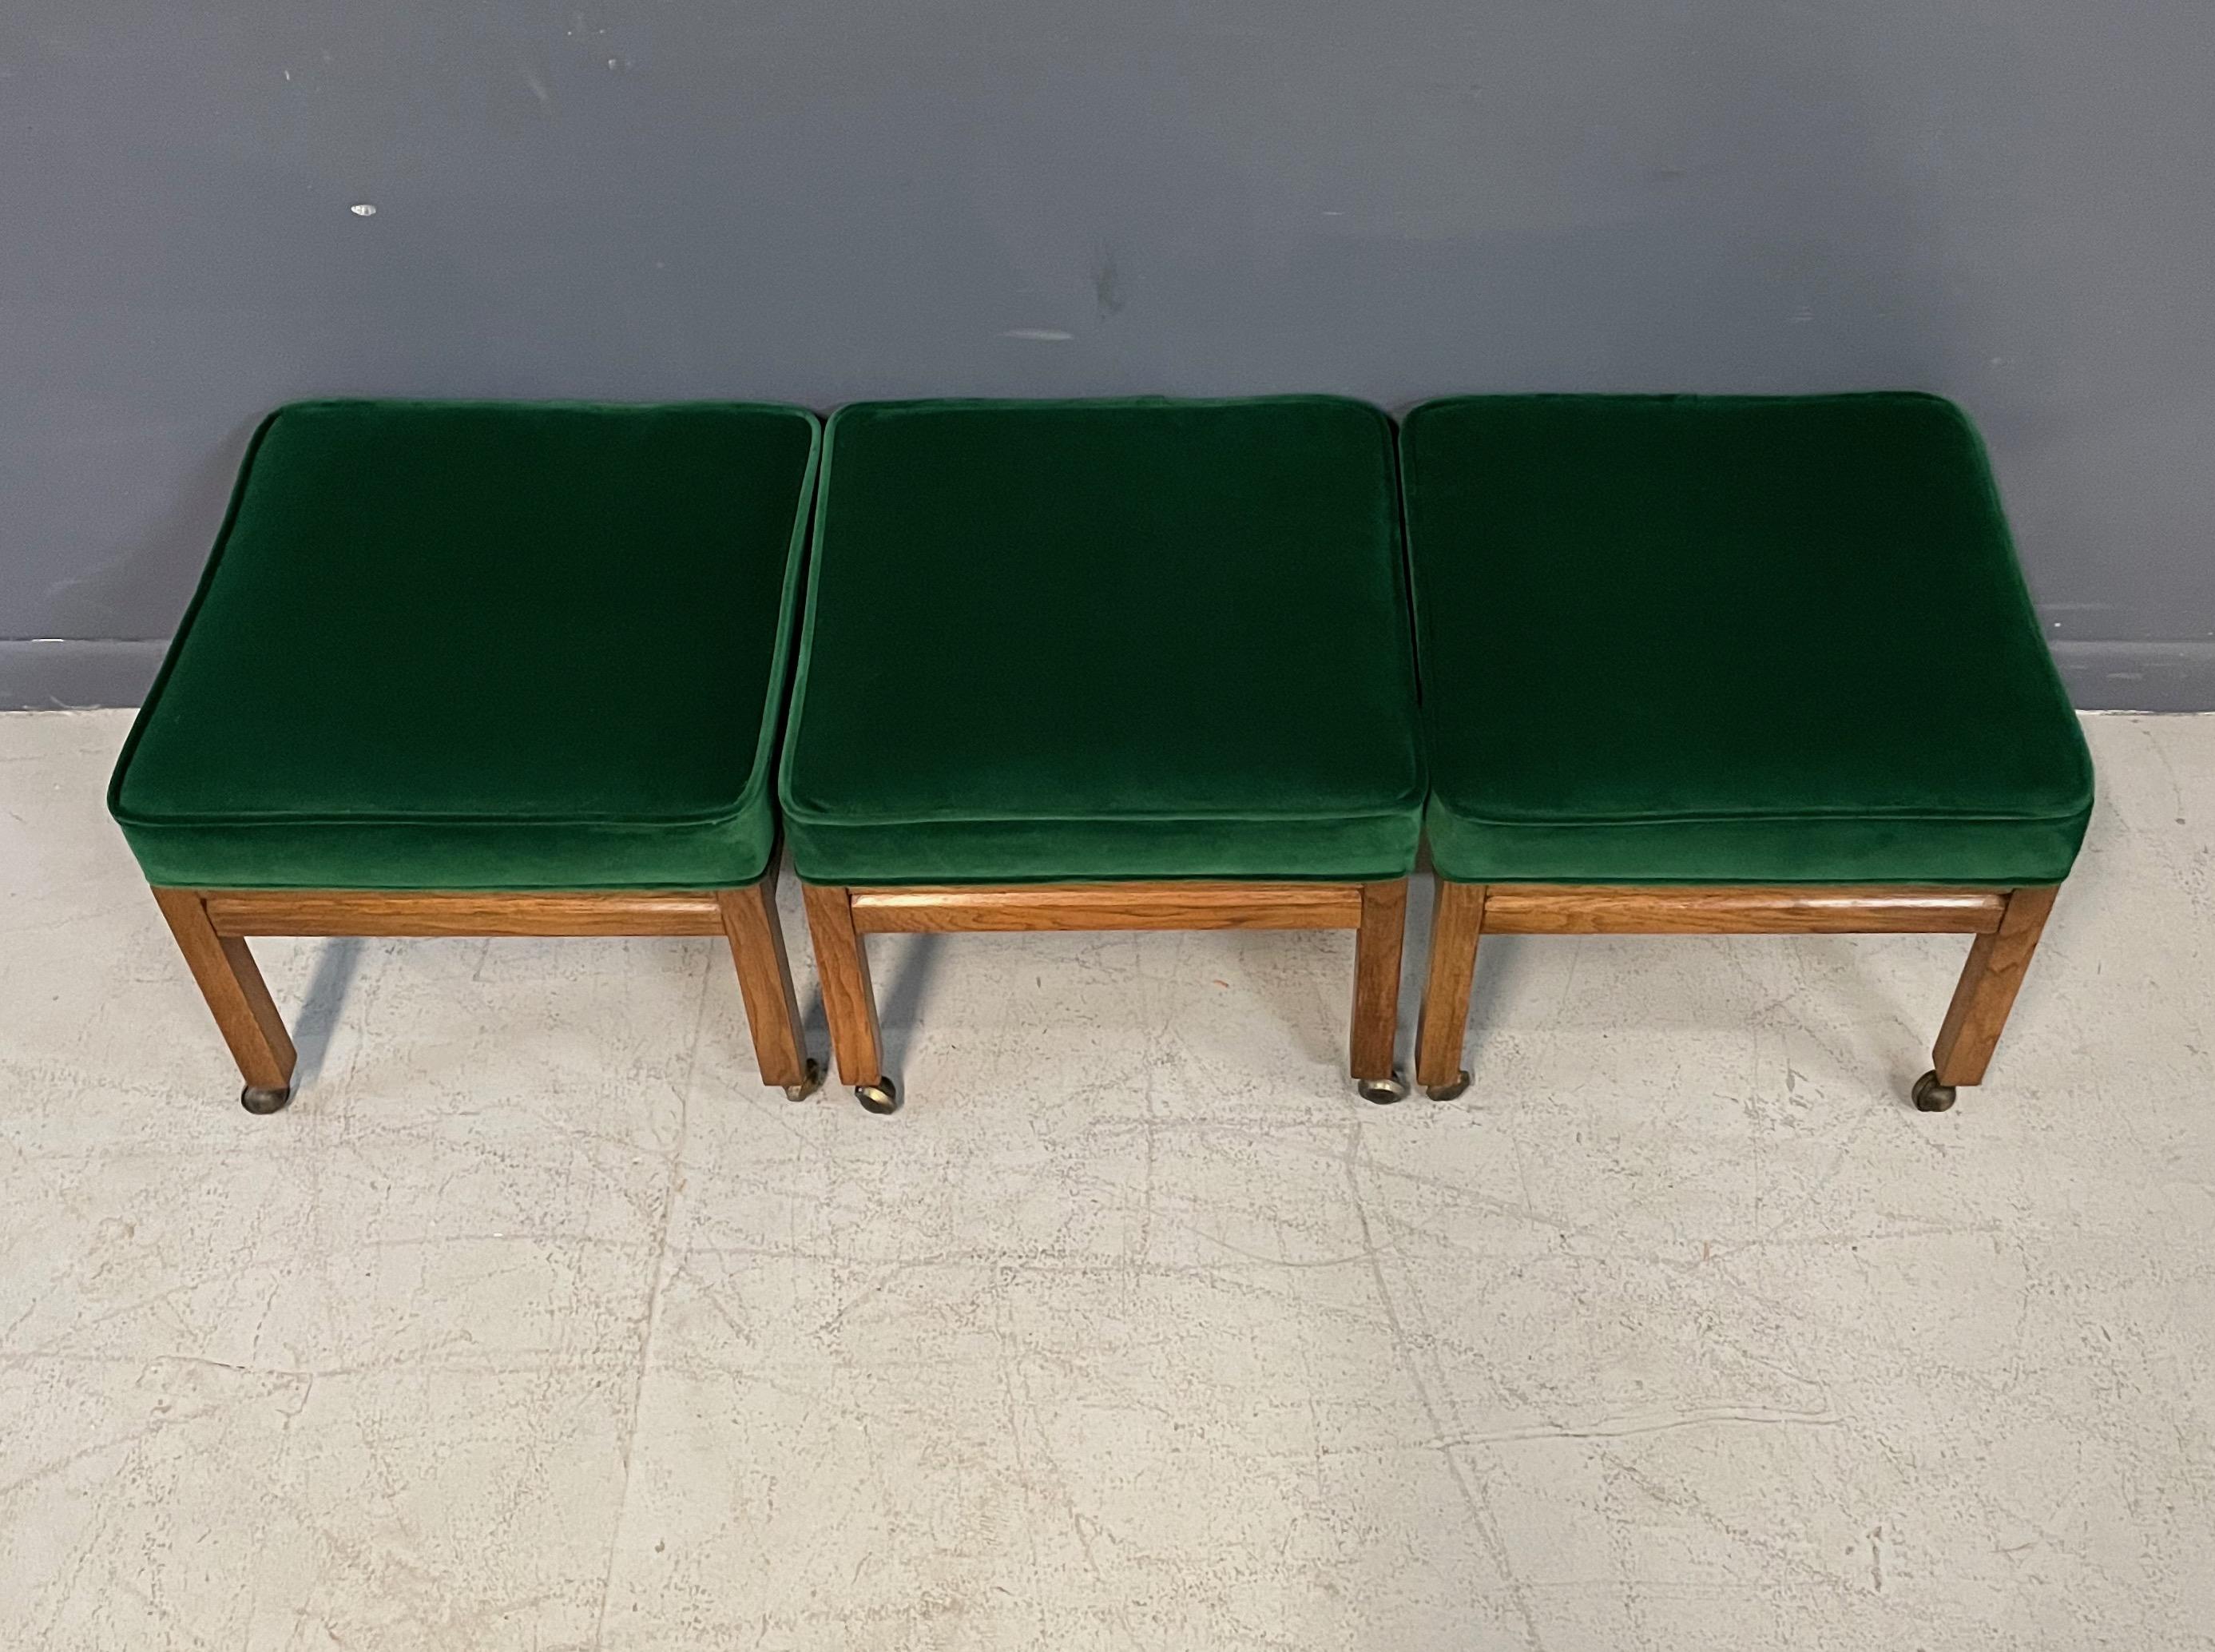 Trio of Square Upholstered Stools in Emerald Velvet and Pecan Probber Style In Good Condition For Sale In Philadelphia, PA